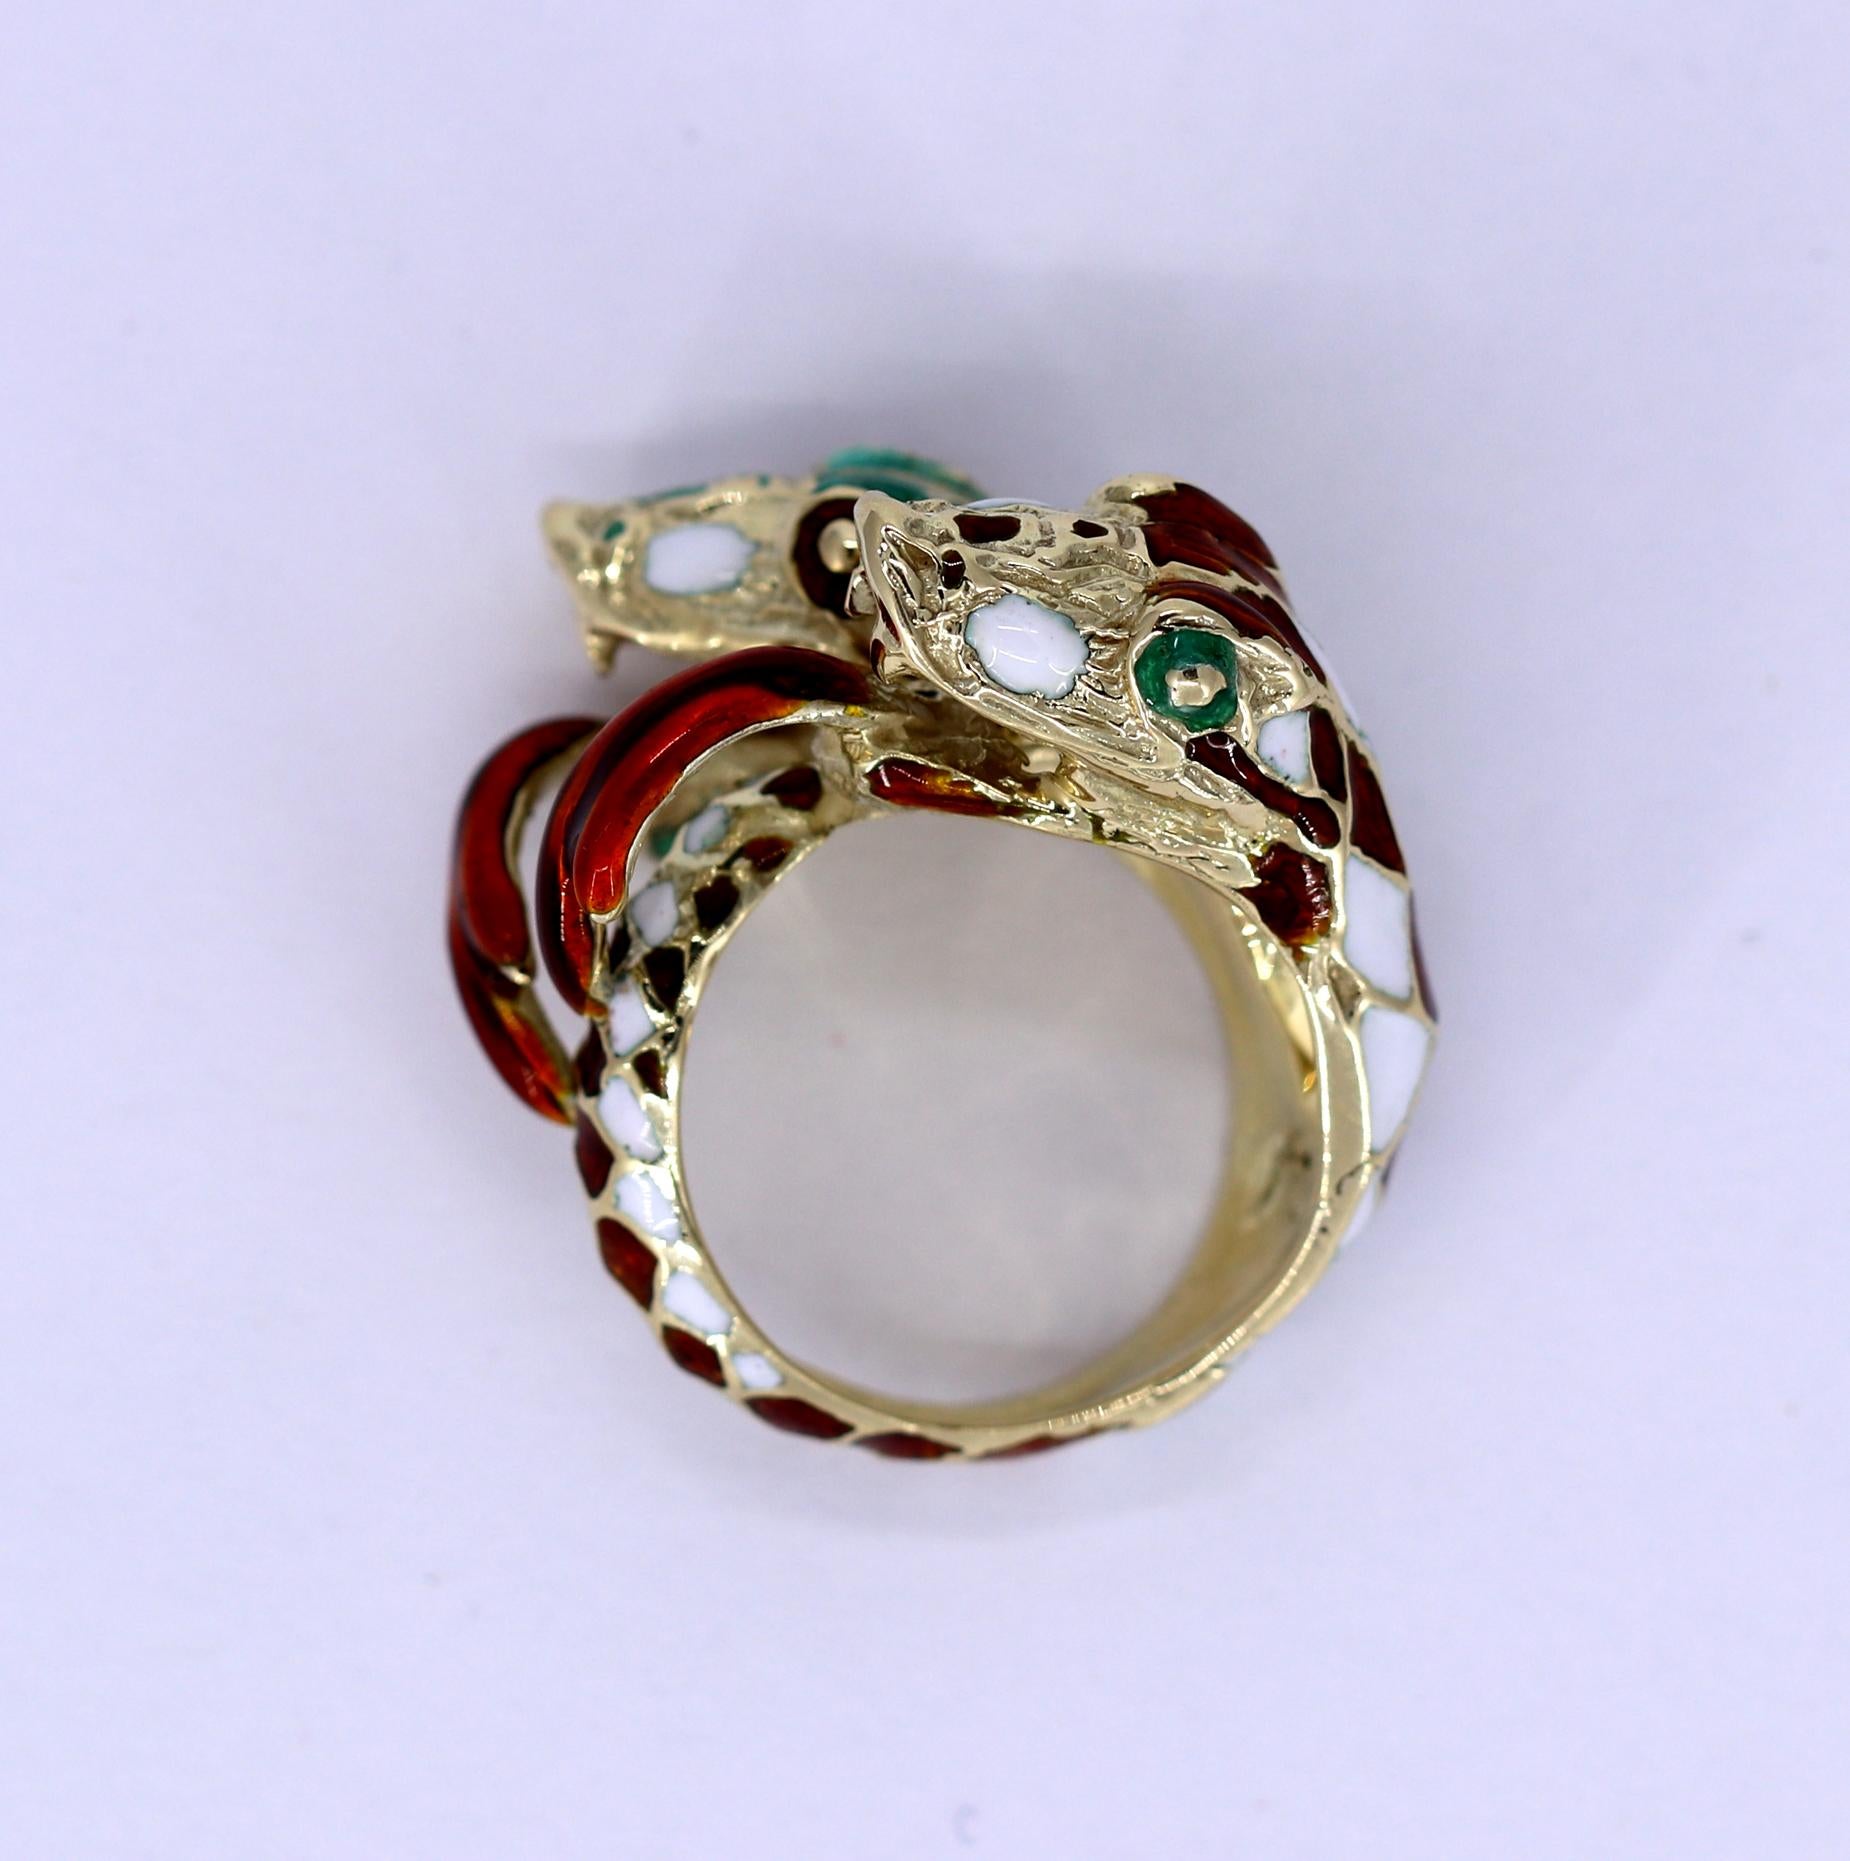 Green White and Red Harlequin Pattern Enameled Double Headed Snake Ring 2